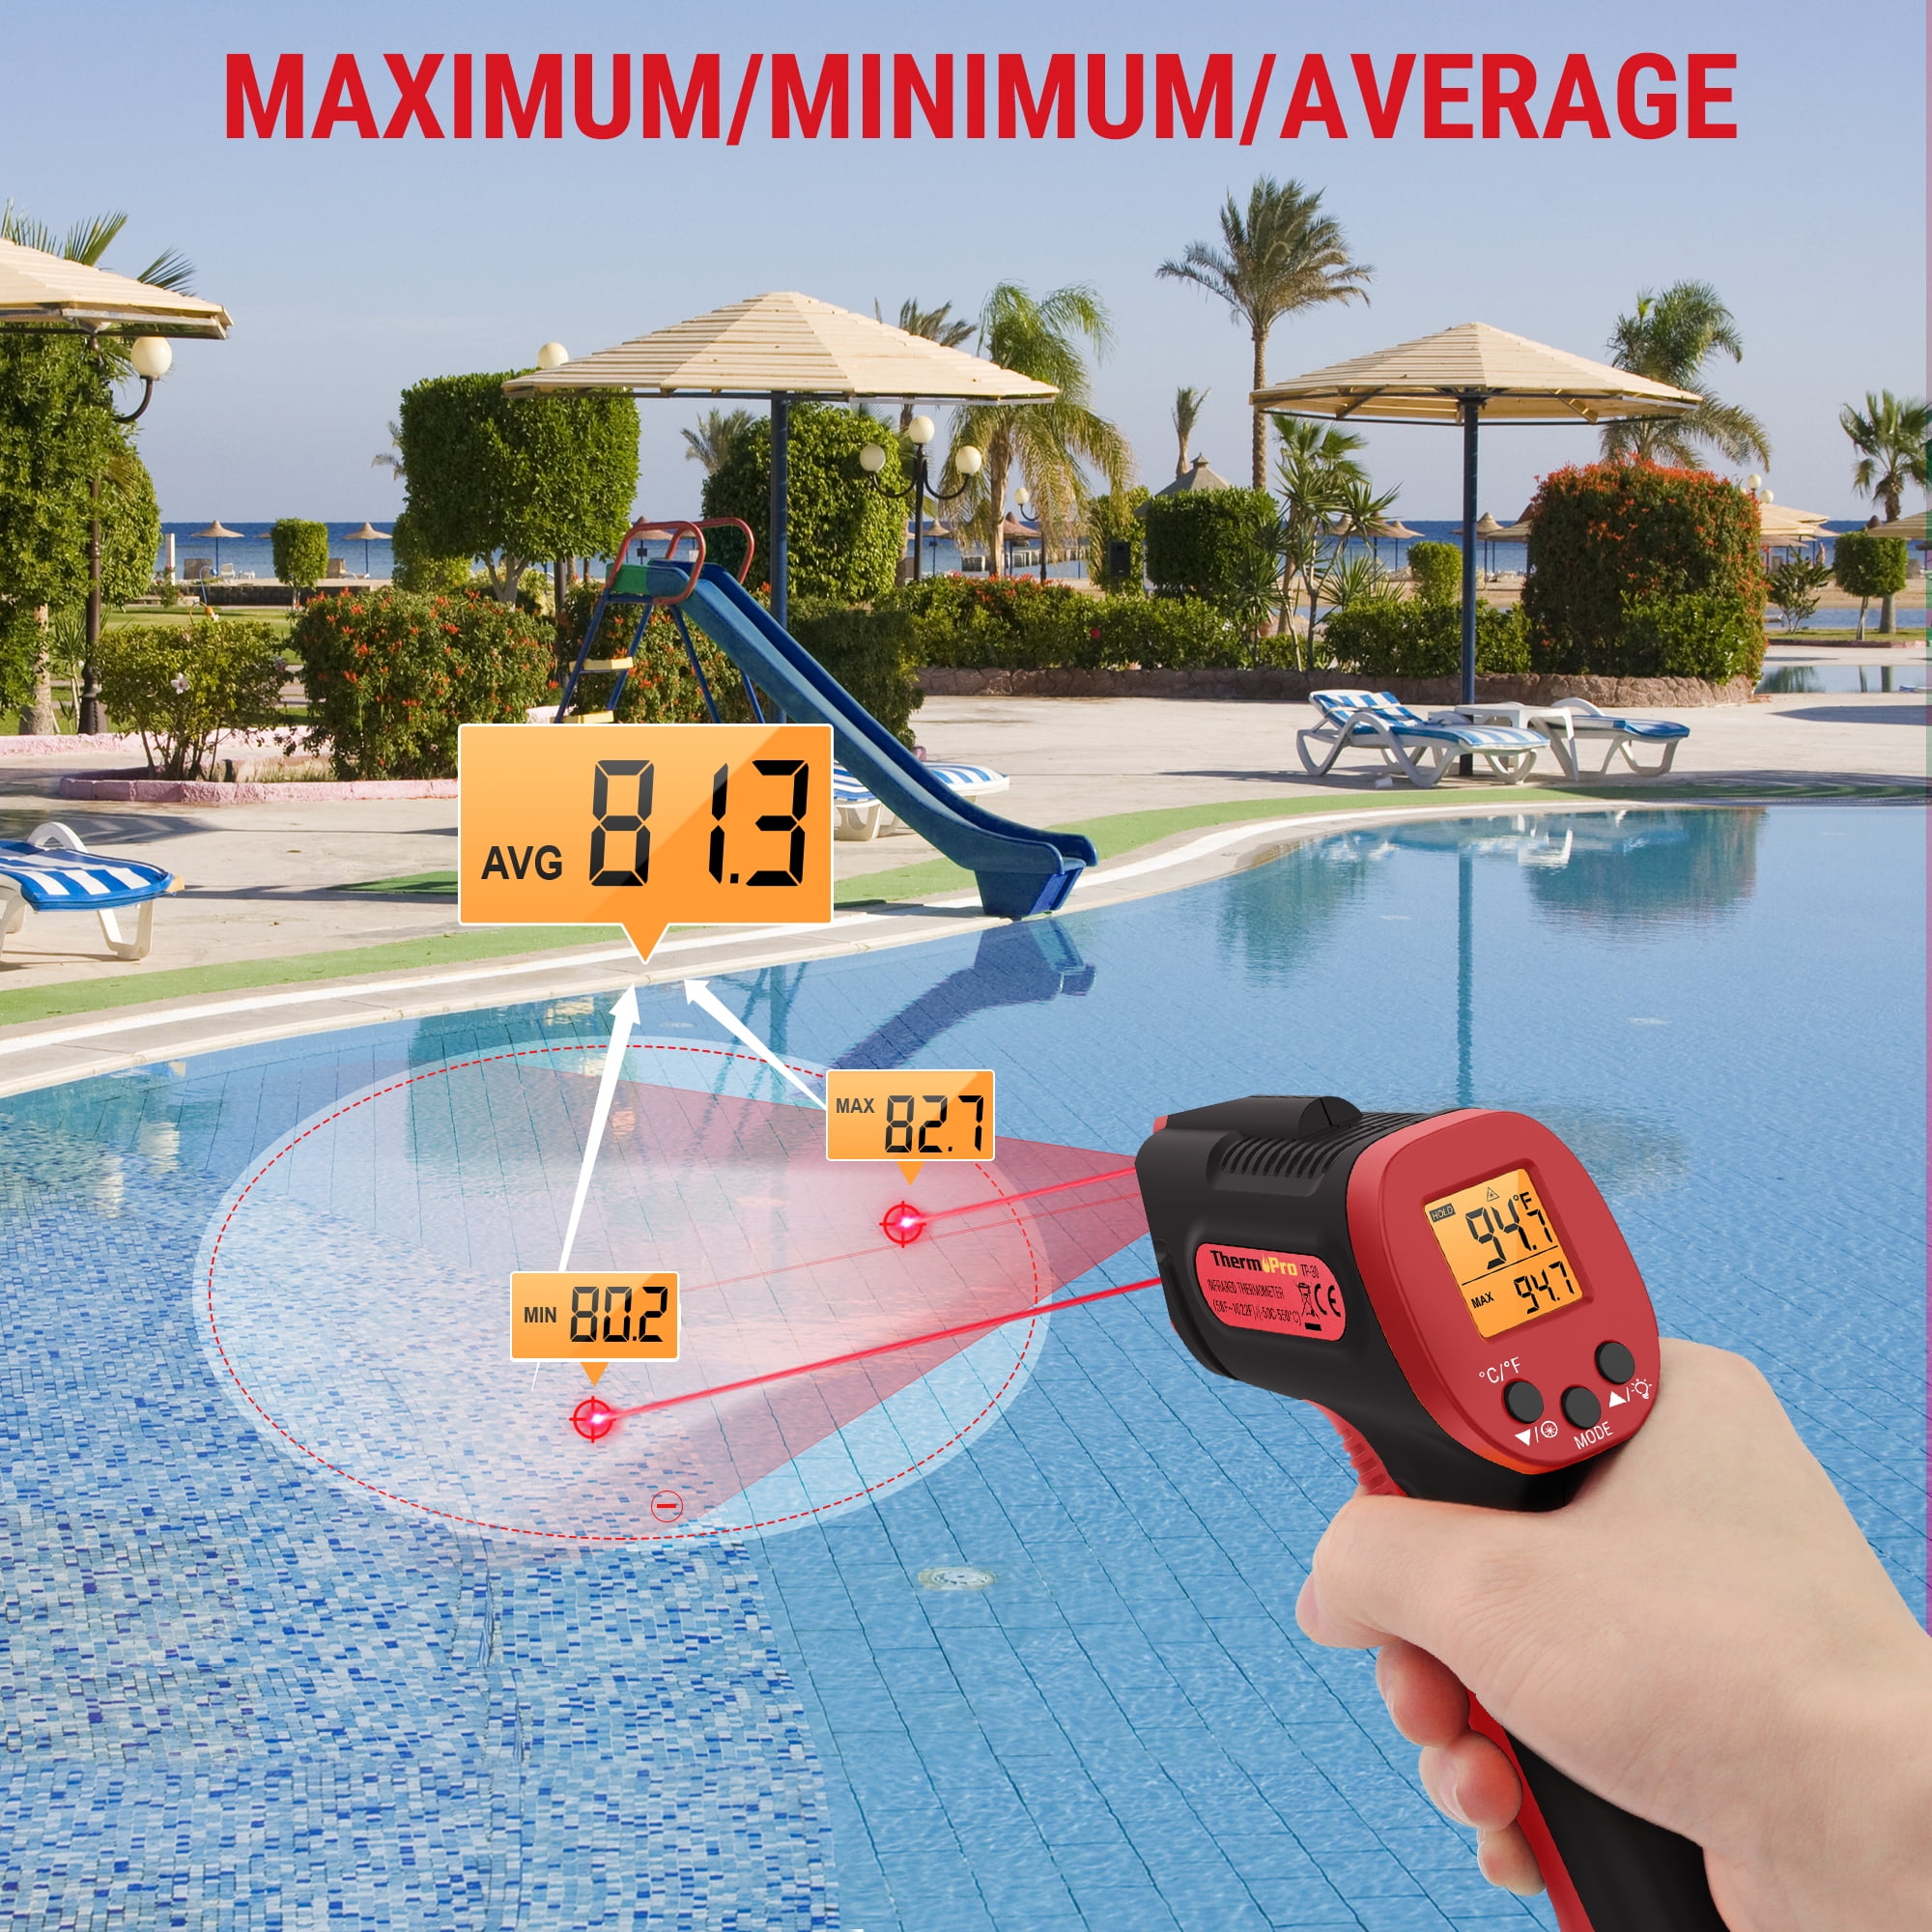 PST-100 Infrared Laser Thermometer - Price & Features